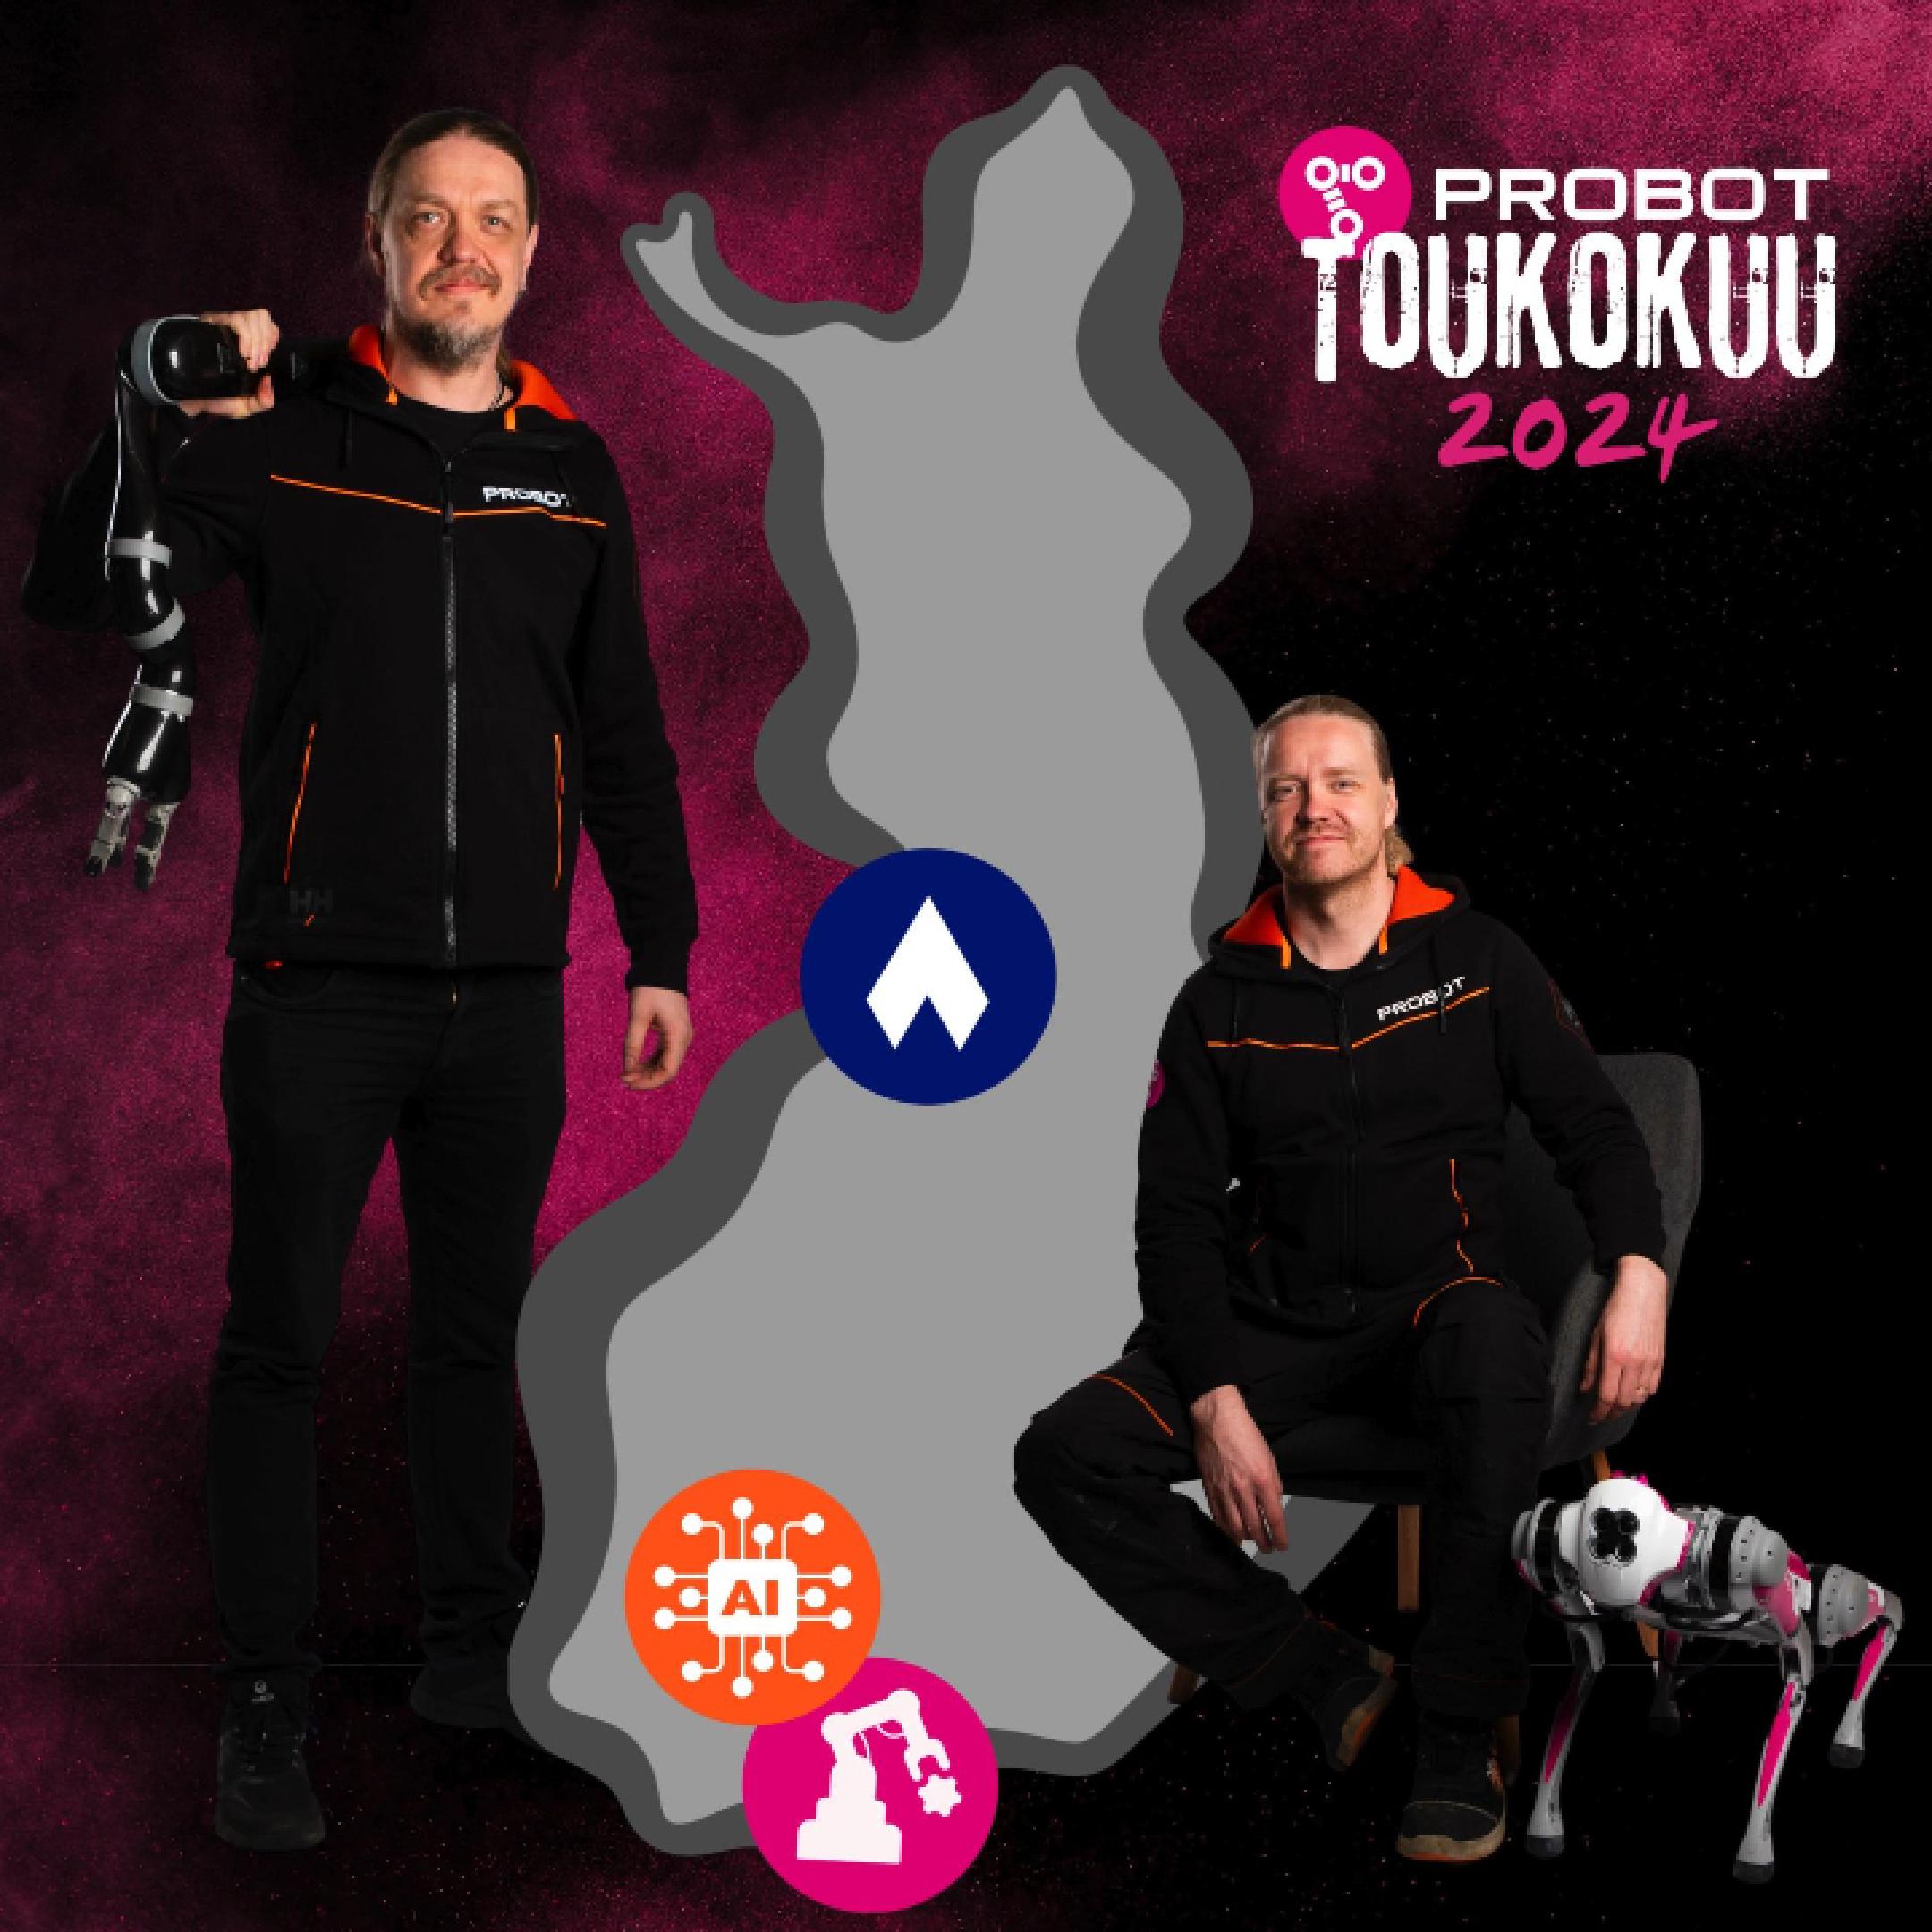 Black and pink background pattern and grey map of Finland. In front of the map is a man holding a robot arm and another man sitting in a chair next to the robot dog.